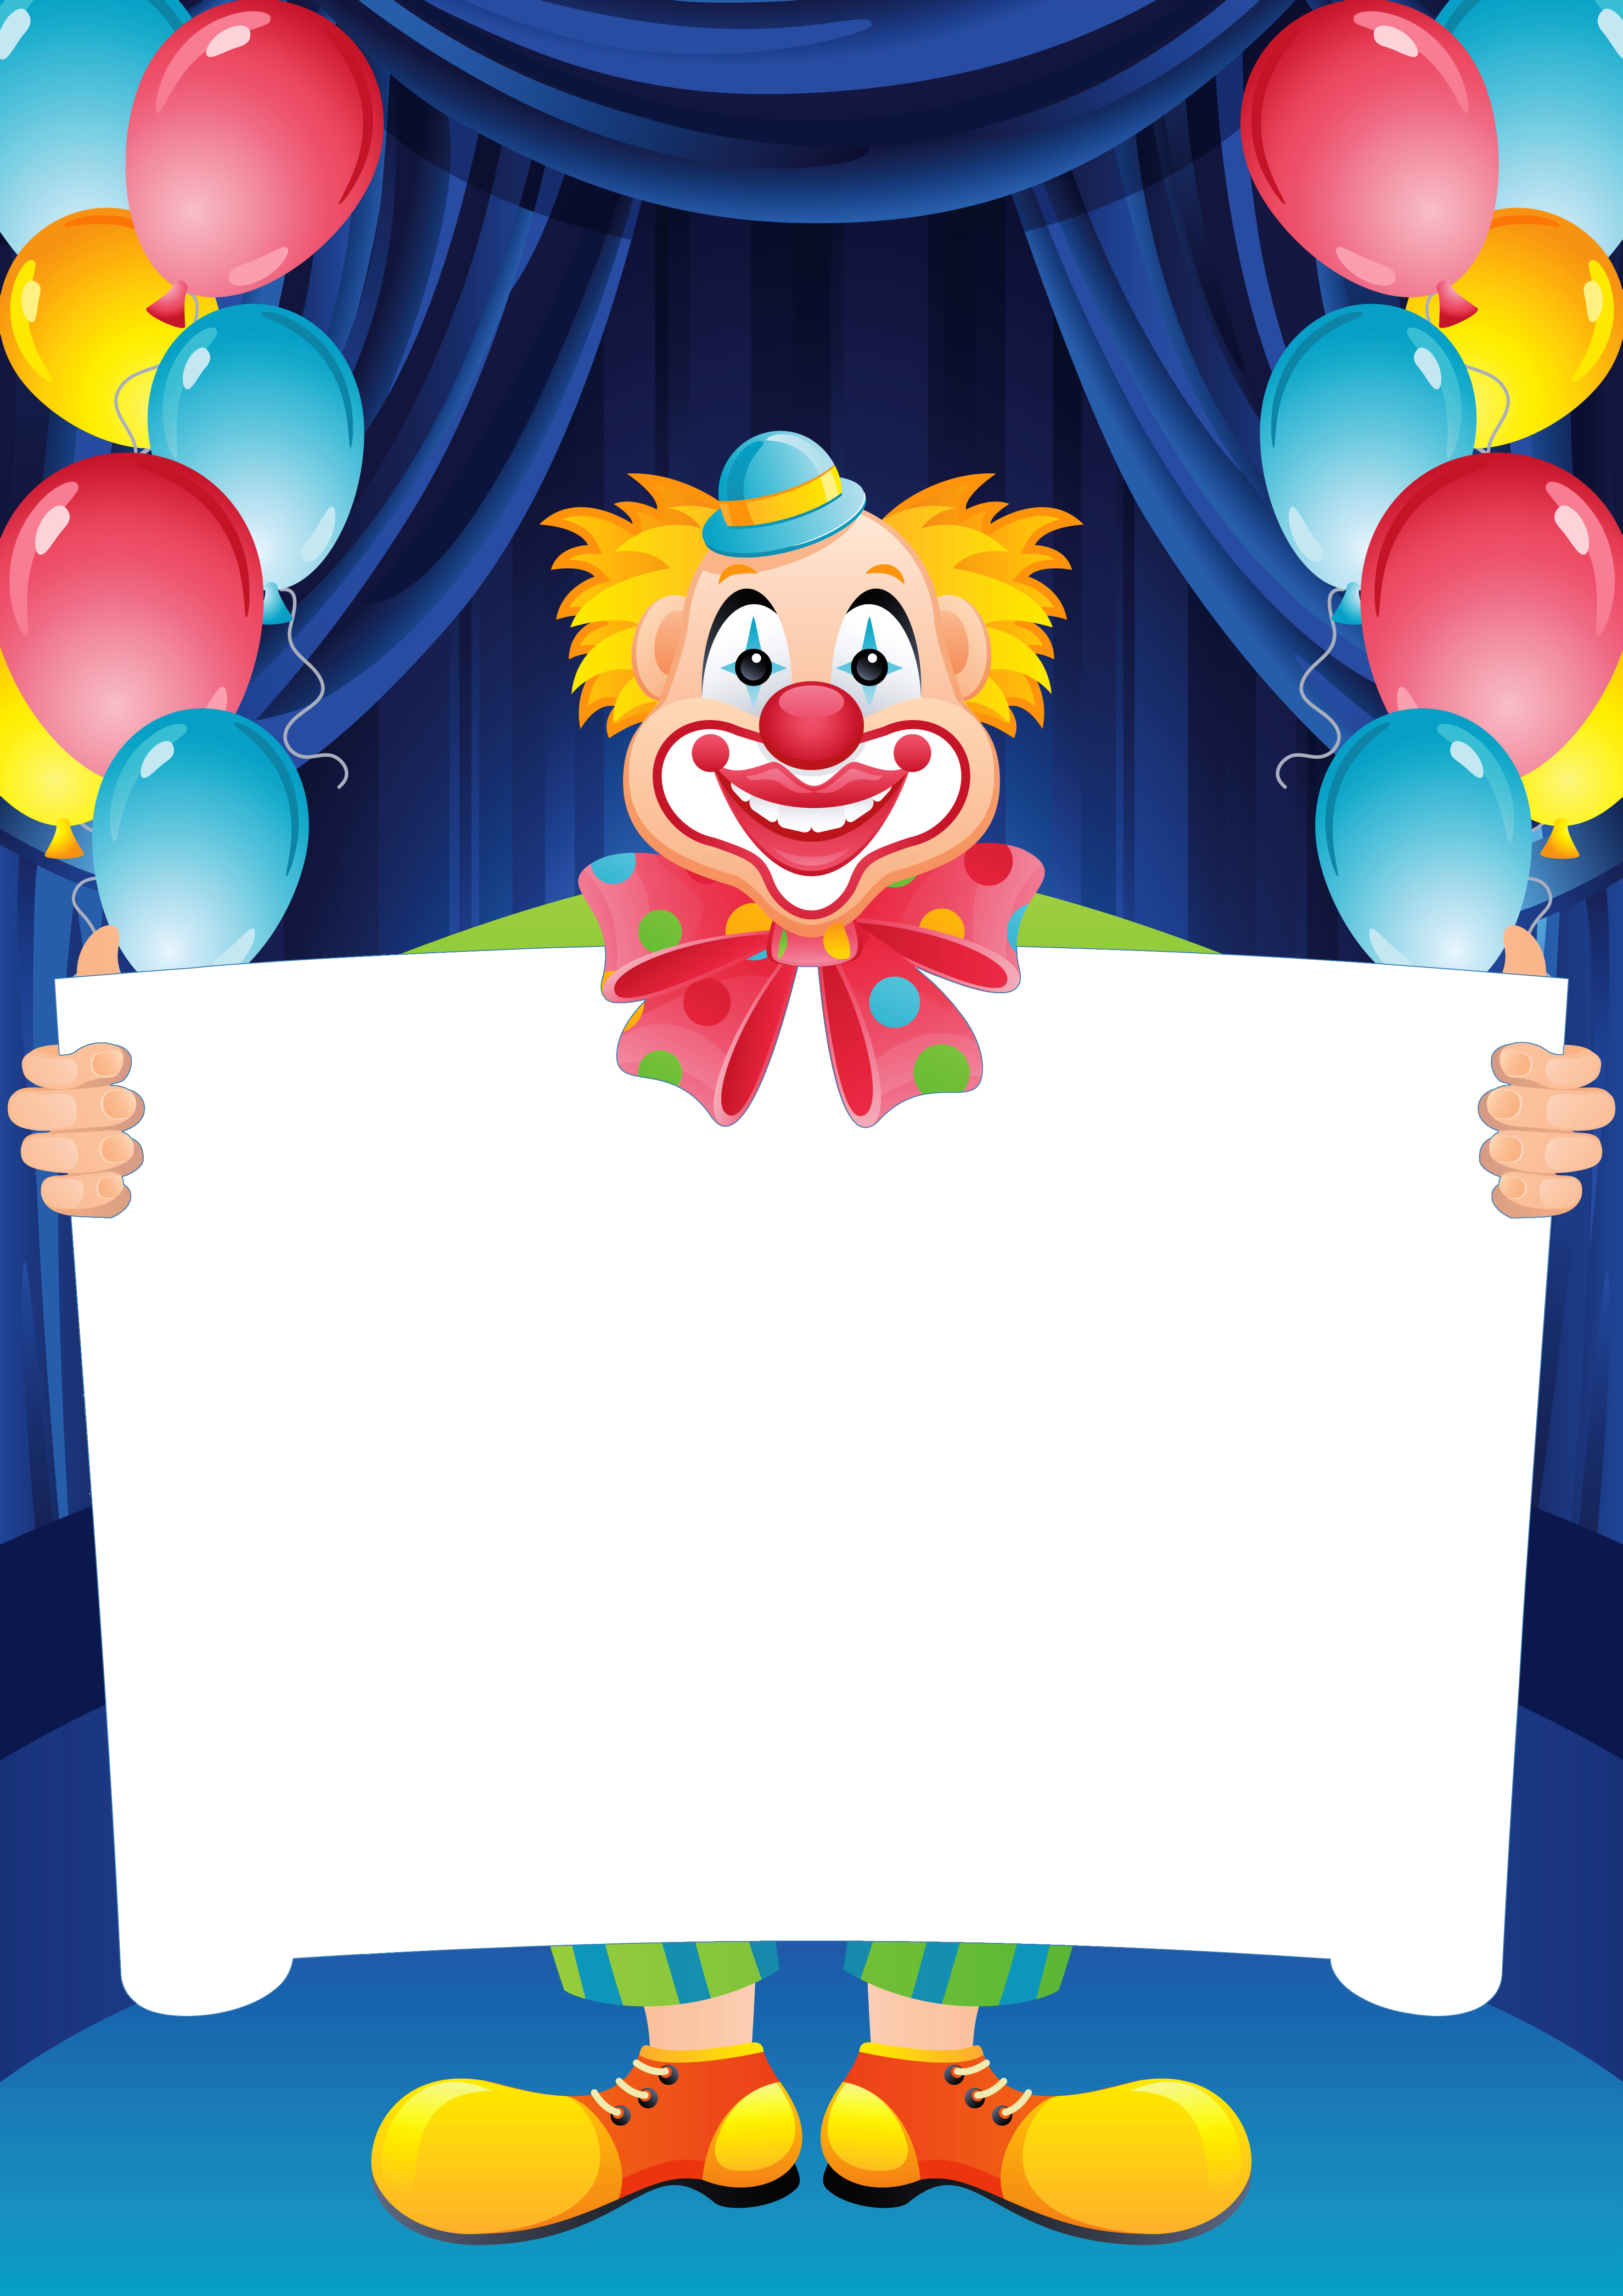 Free Birthday Frames, Download Free Birthday Frames png images, Free